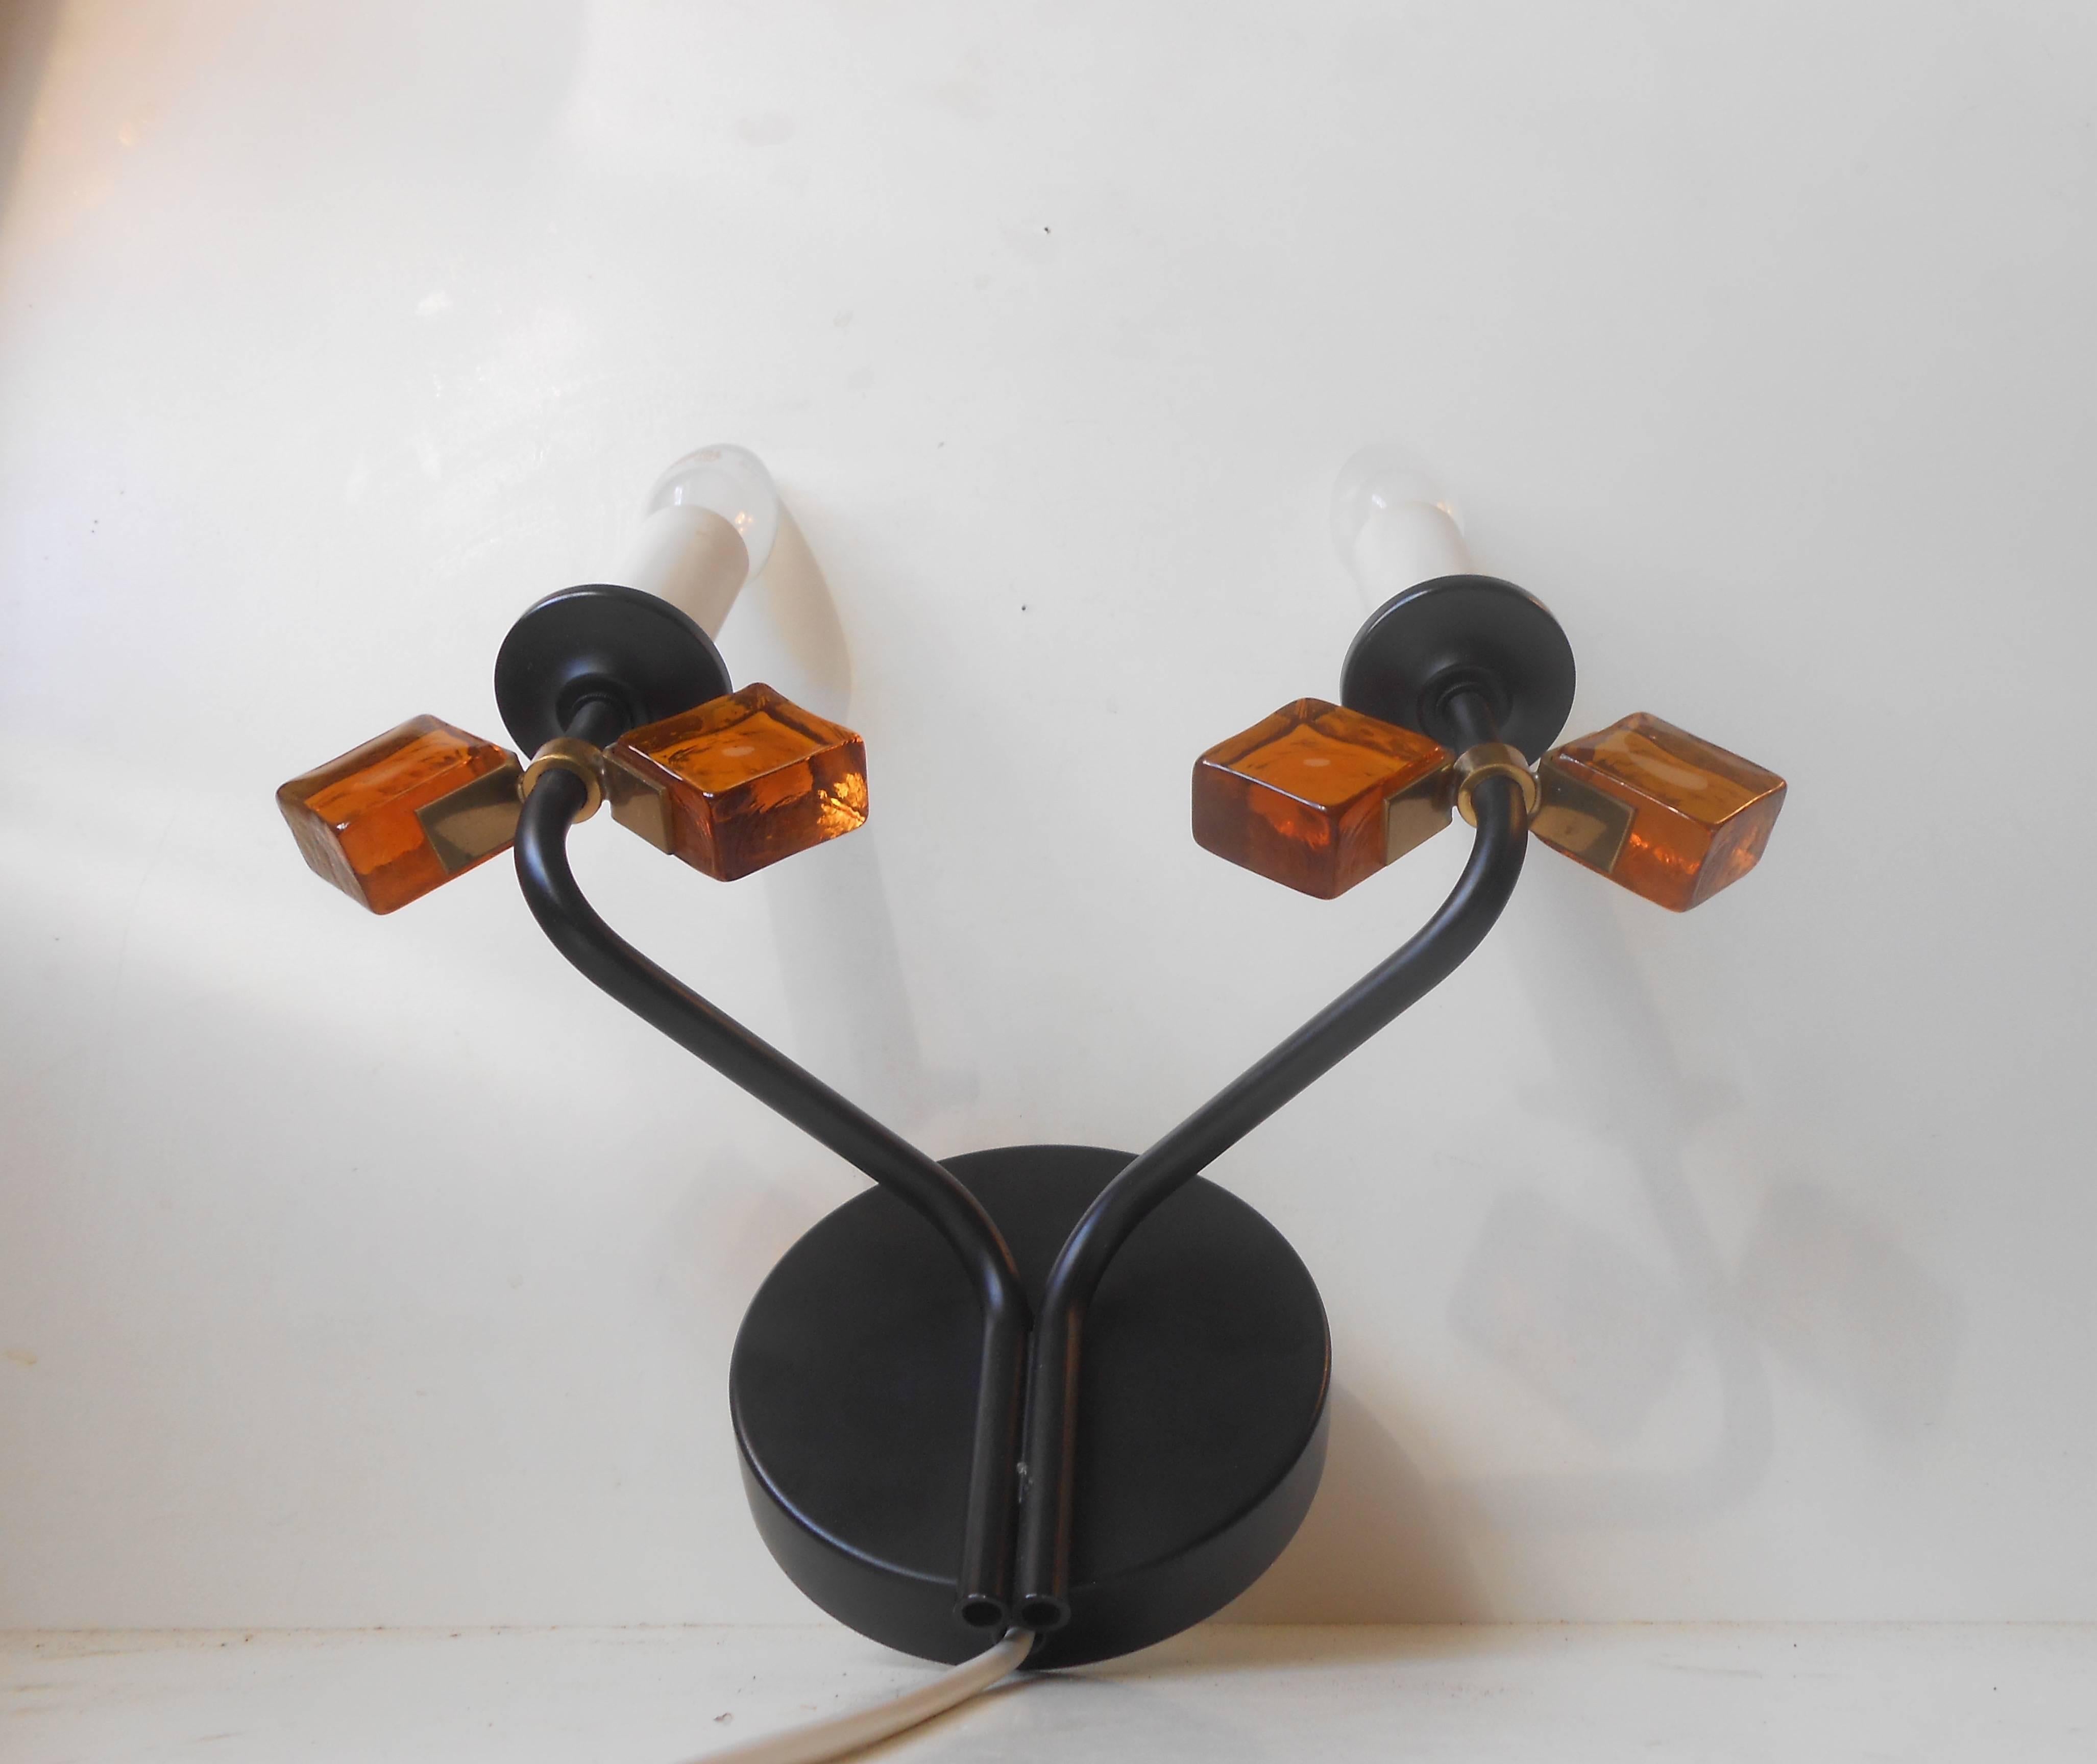 Black-bodied sconce by Holm-Sorensen with rotating brass and amber glass butterfly-shaped settings. Original sticker to the backside. Measurements (approximate): H 12 inches, W 10 inches.